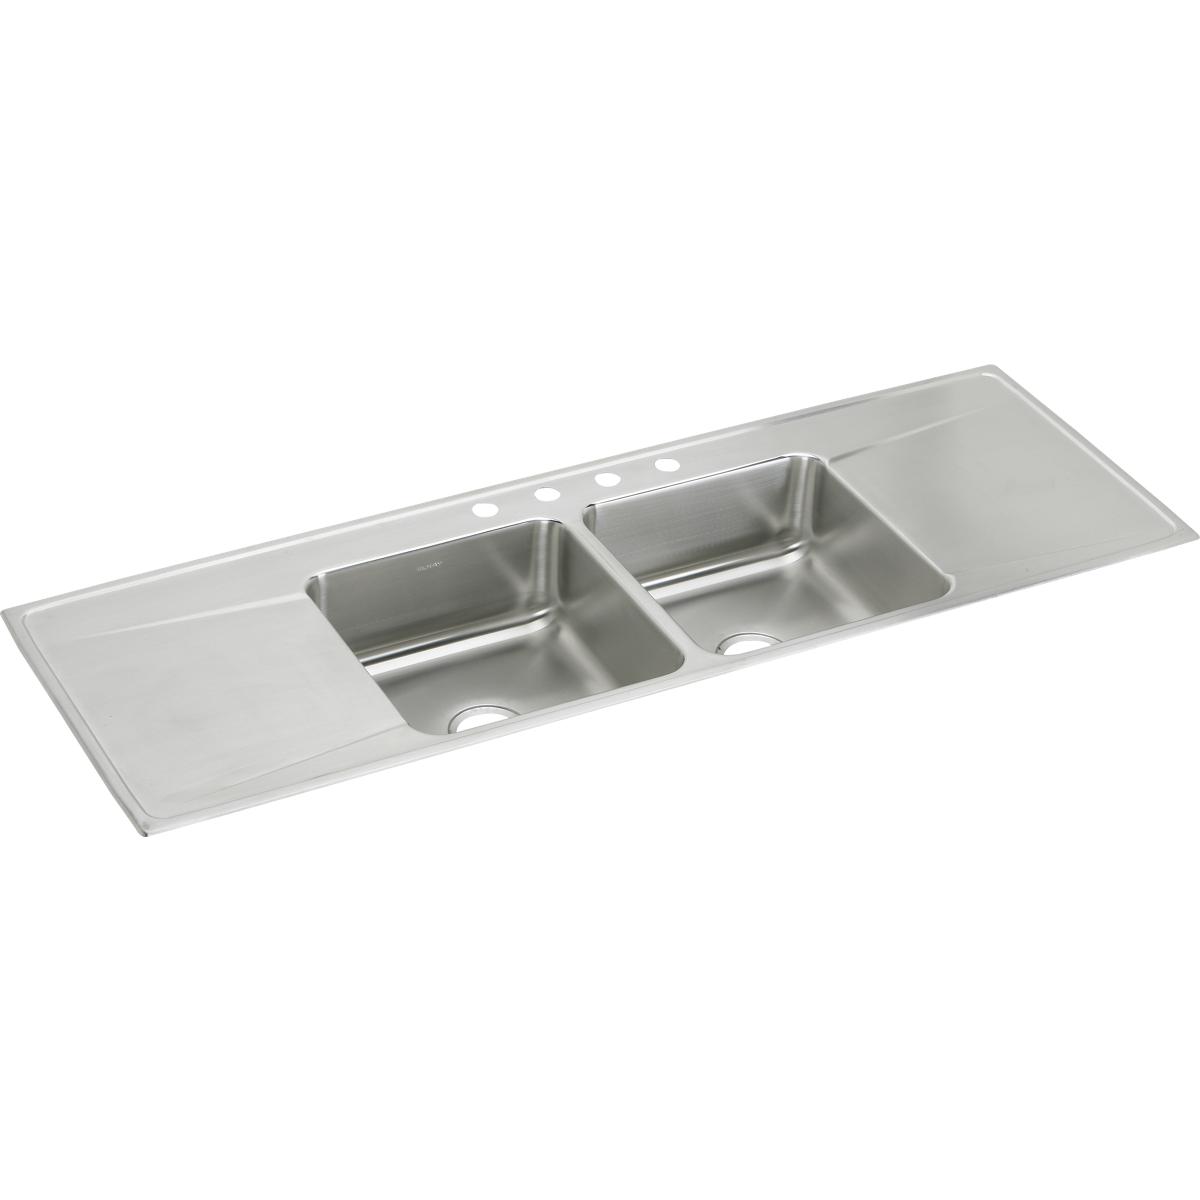 Elkay Lustertone Classic Stainless Steel 66" x 22" x 7-5/8" Equal Double Bowl Drop-in Sink with Drainboard